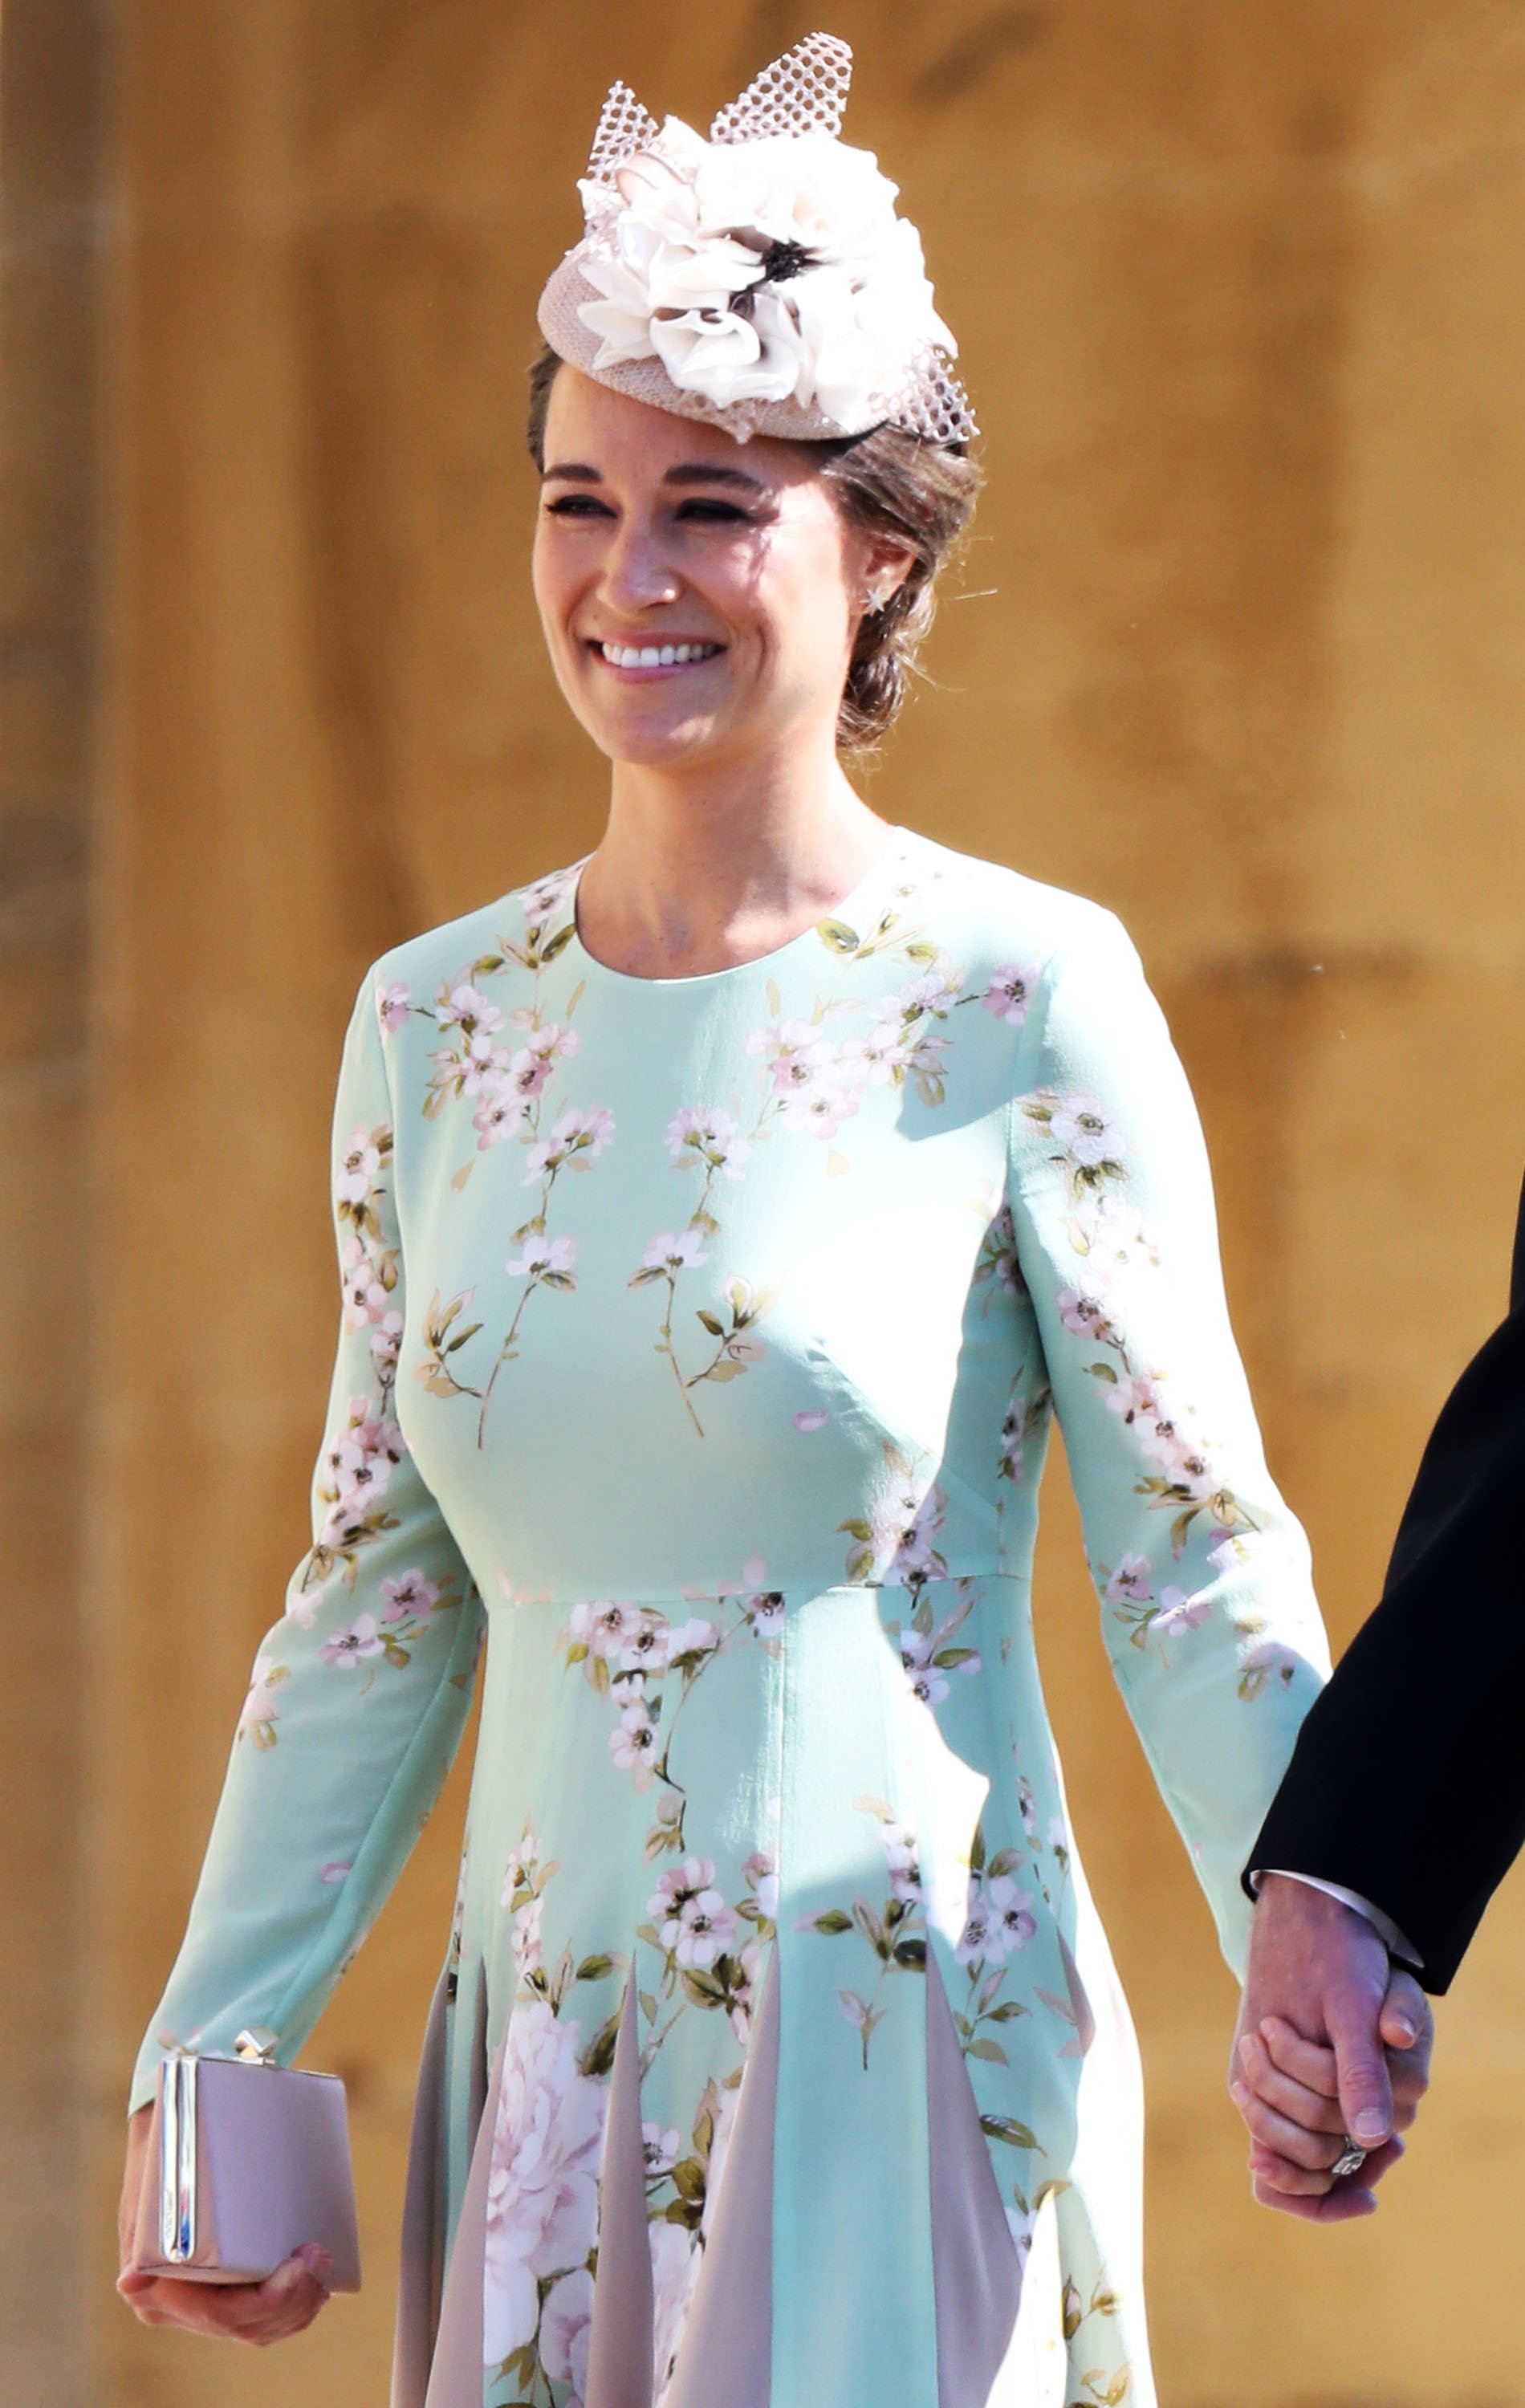 Pippa Middleton during the wedding of Prince Harry to Ms Meghan Markle. | Source: Getty Images